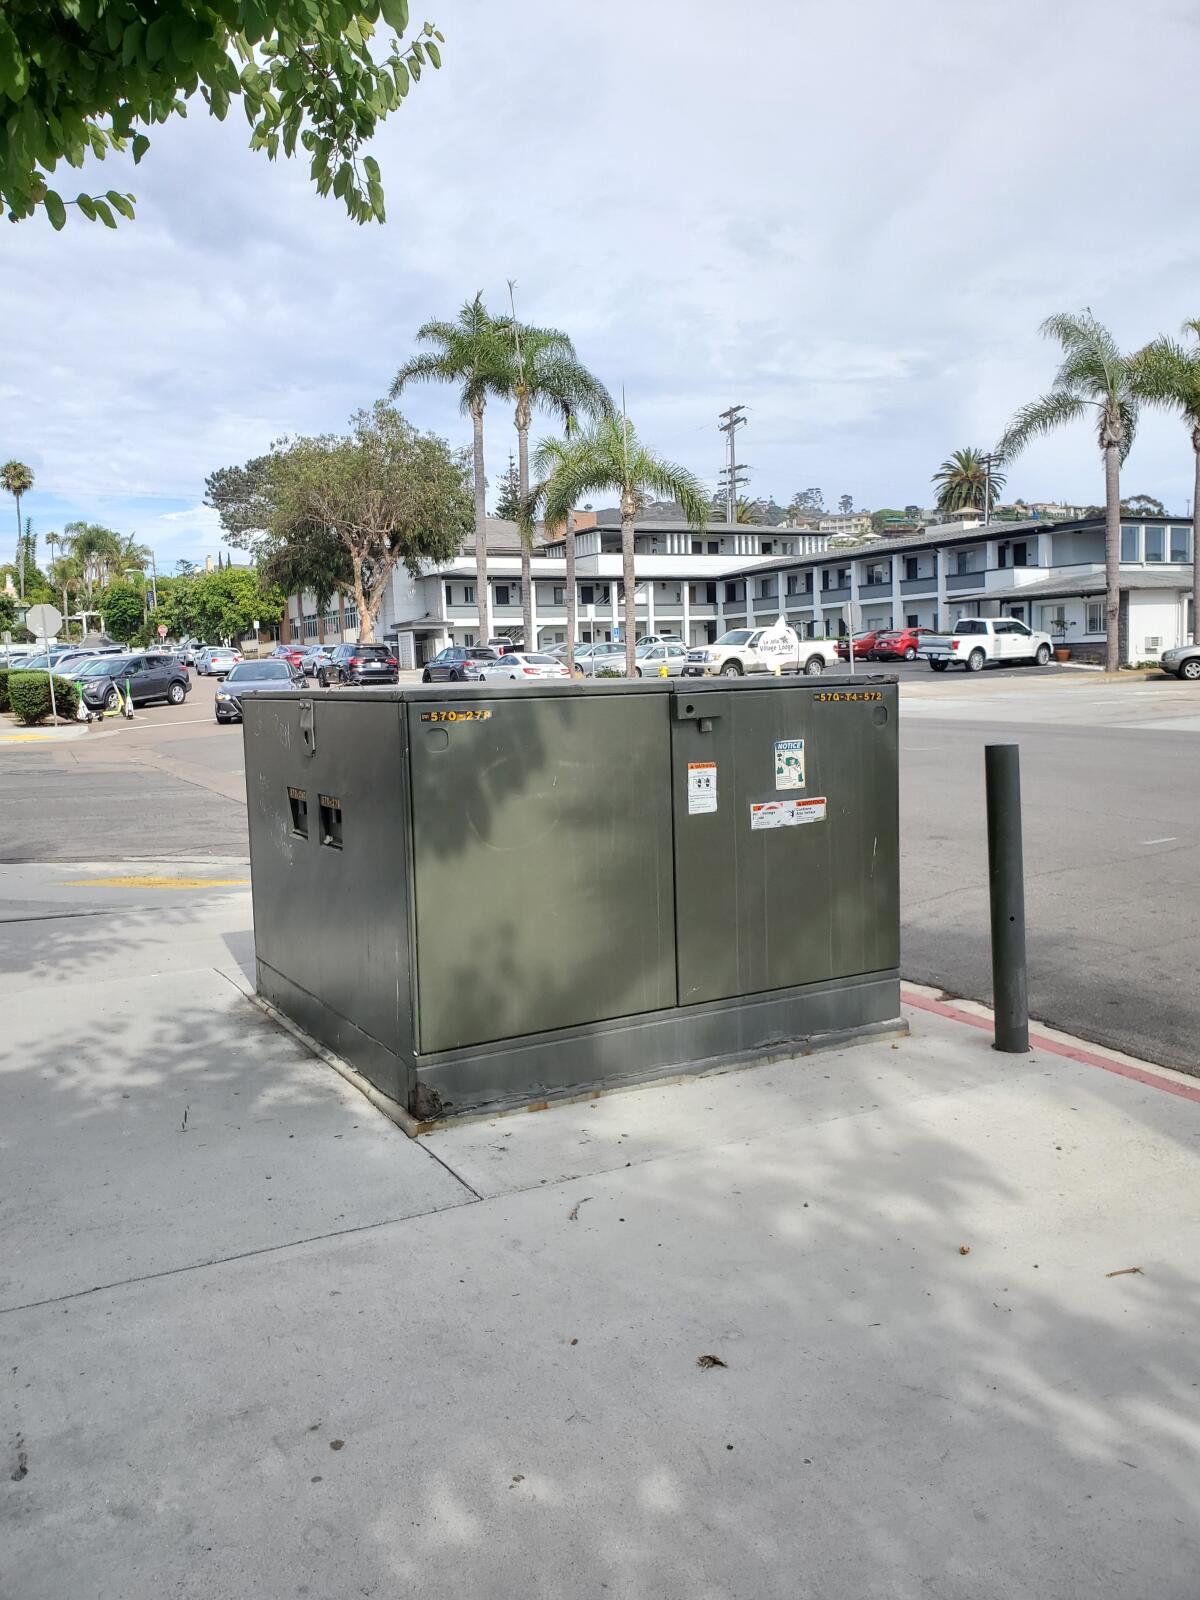 A utility box at Herschel Avenue and Silverado Street in La Jolla has been eyed for possible wrapping in directional imagery.